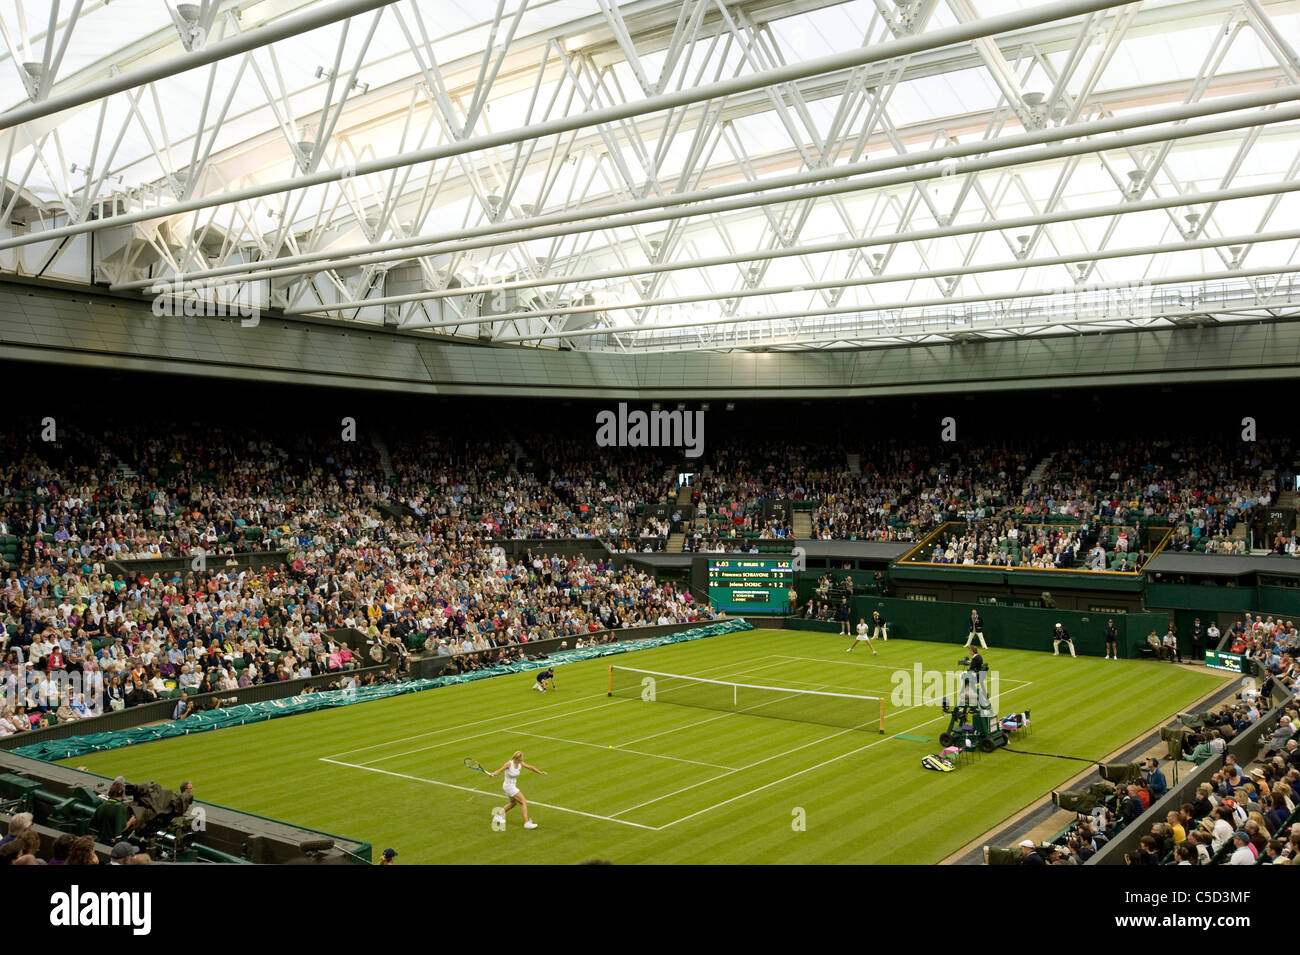 View of play on Centre Court under the roof during the 2011 Wimbledon Tennis Championships Stock Photo